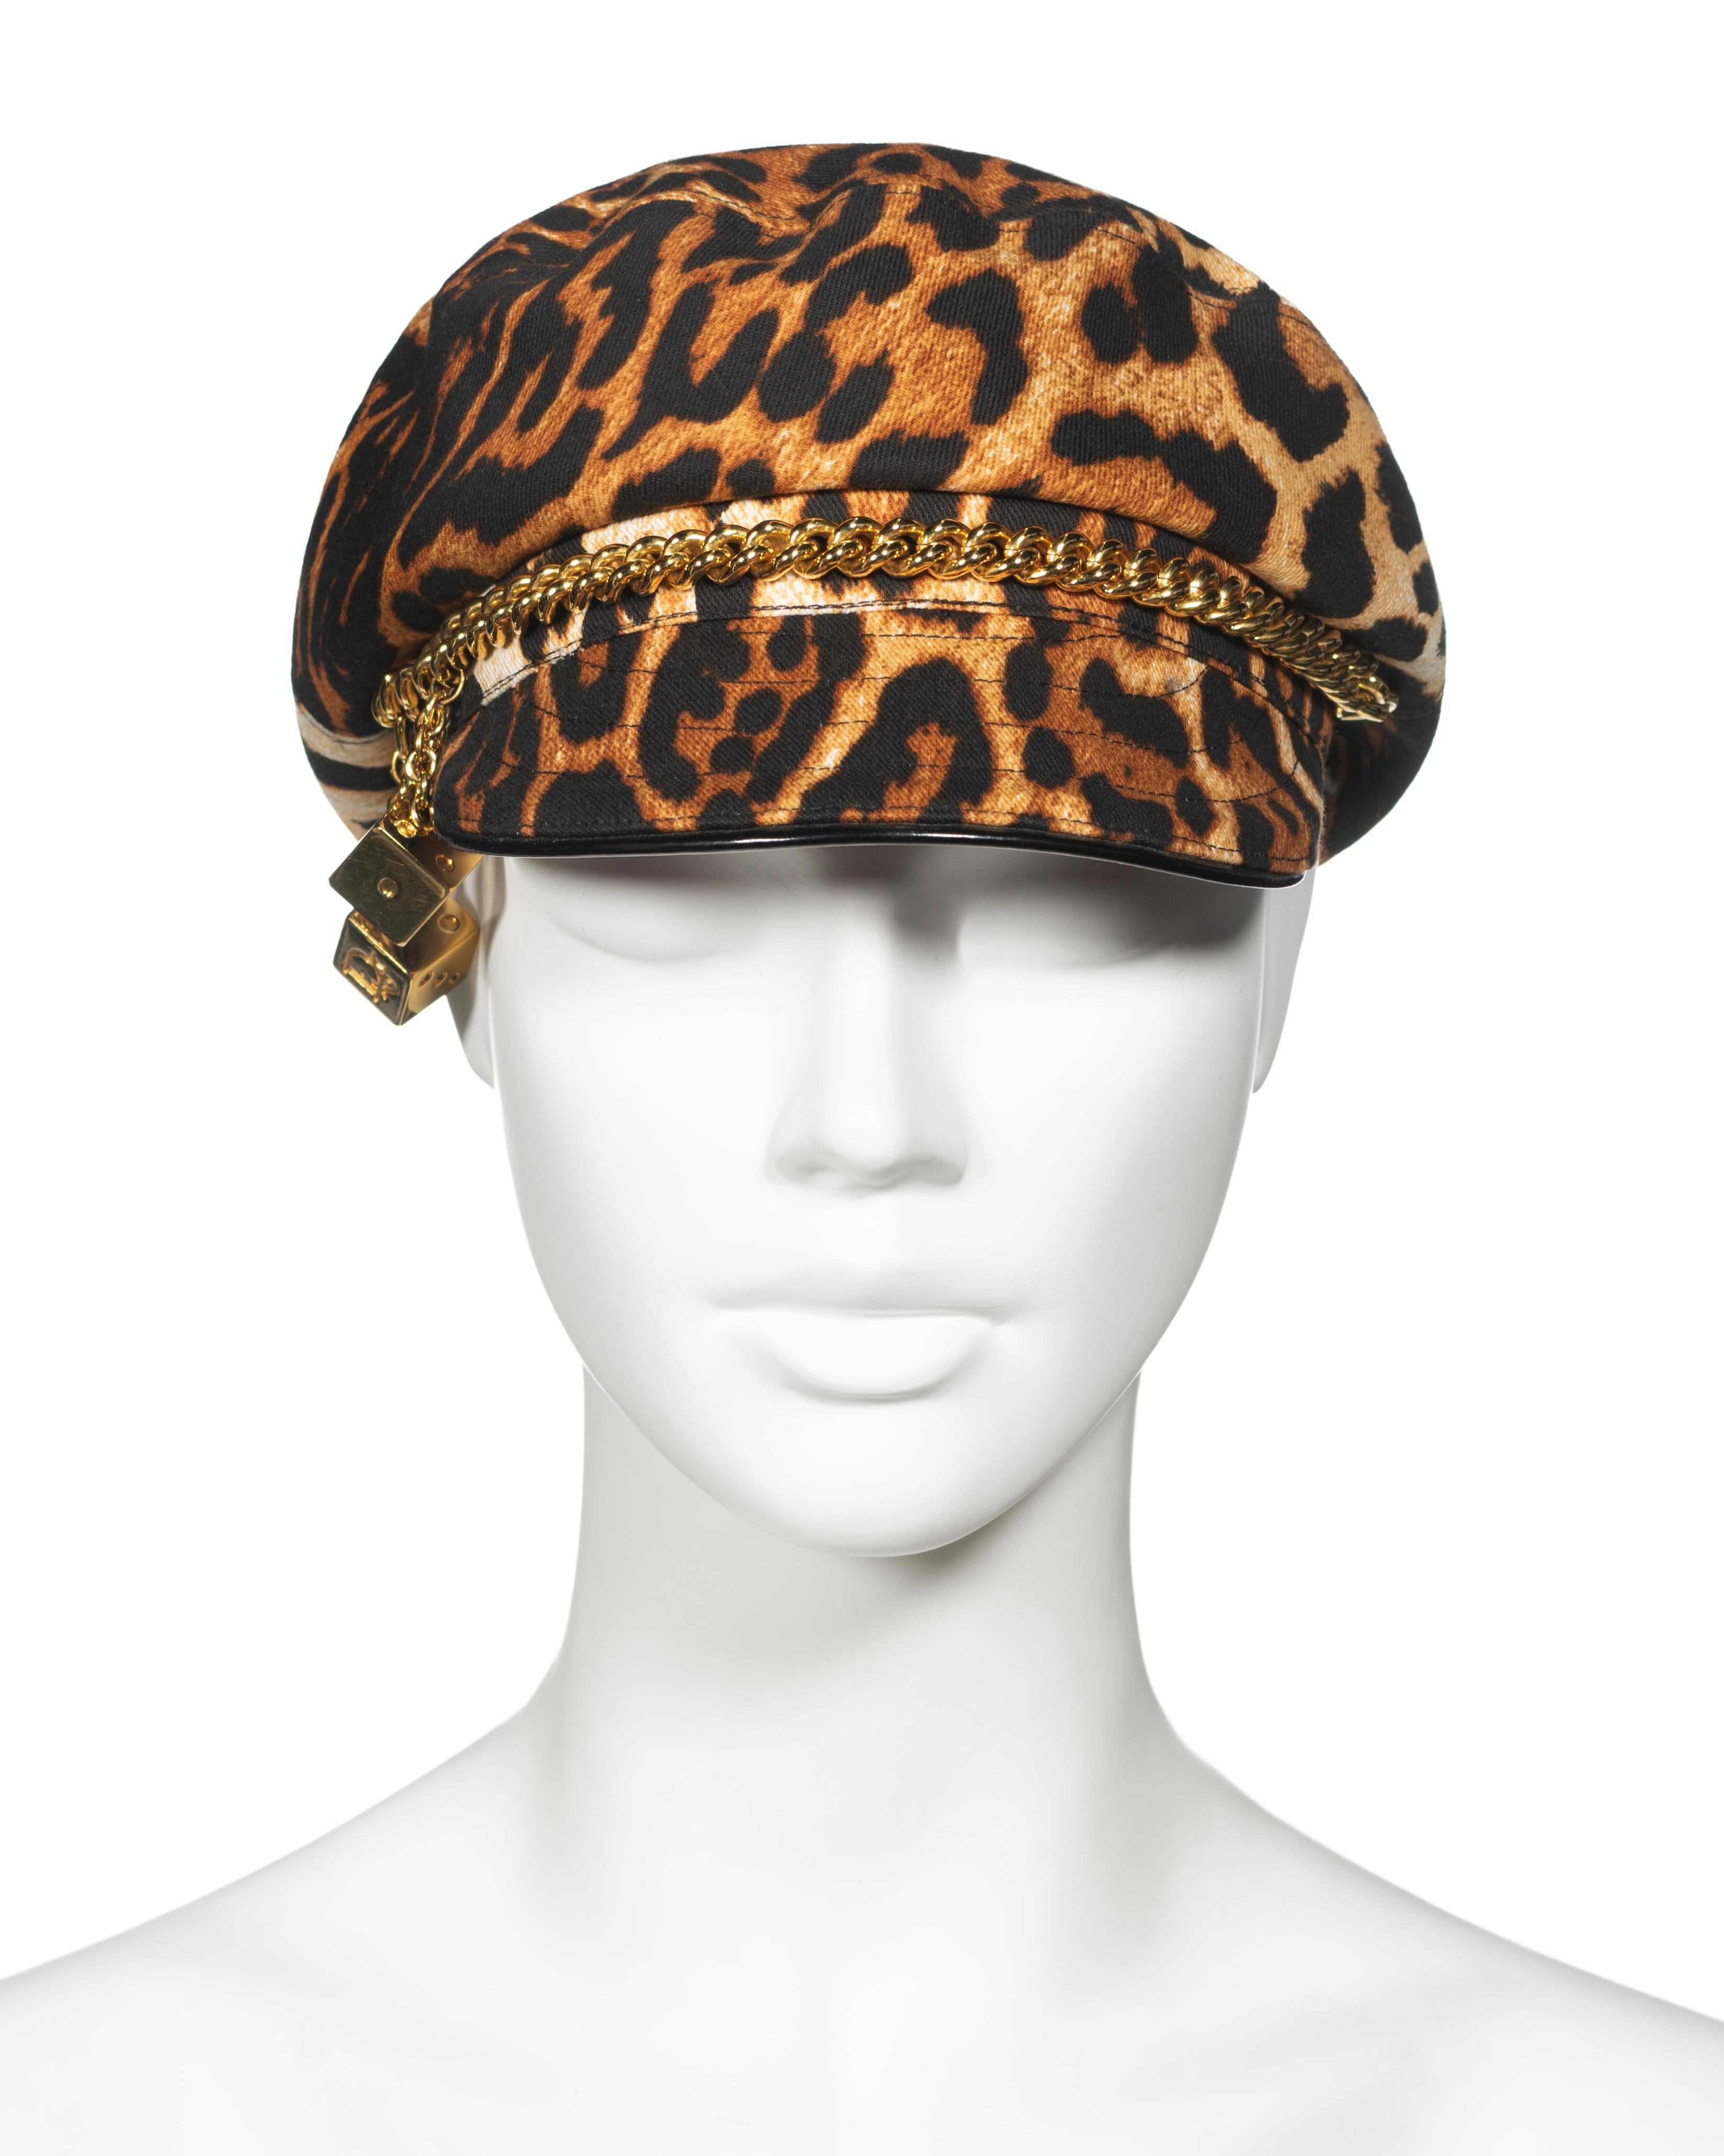 ▪ Christian Dior Bakerboy 'Gambler' Cap 
▪ Creative Director: John Galliano
▪ Fall-Winter 2004
▪ Crafted from robust cotton twill adorned with a leopard print
▪ Accented with a decorative gilt metal chain and two dangling dice at the crown's base
▪